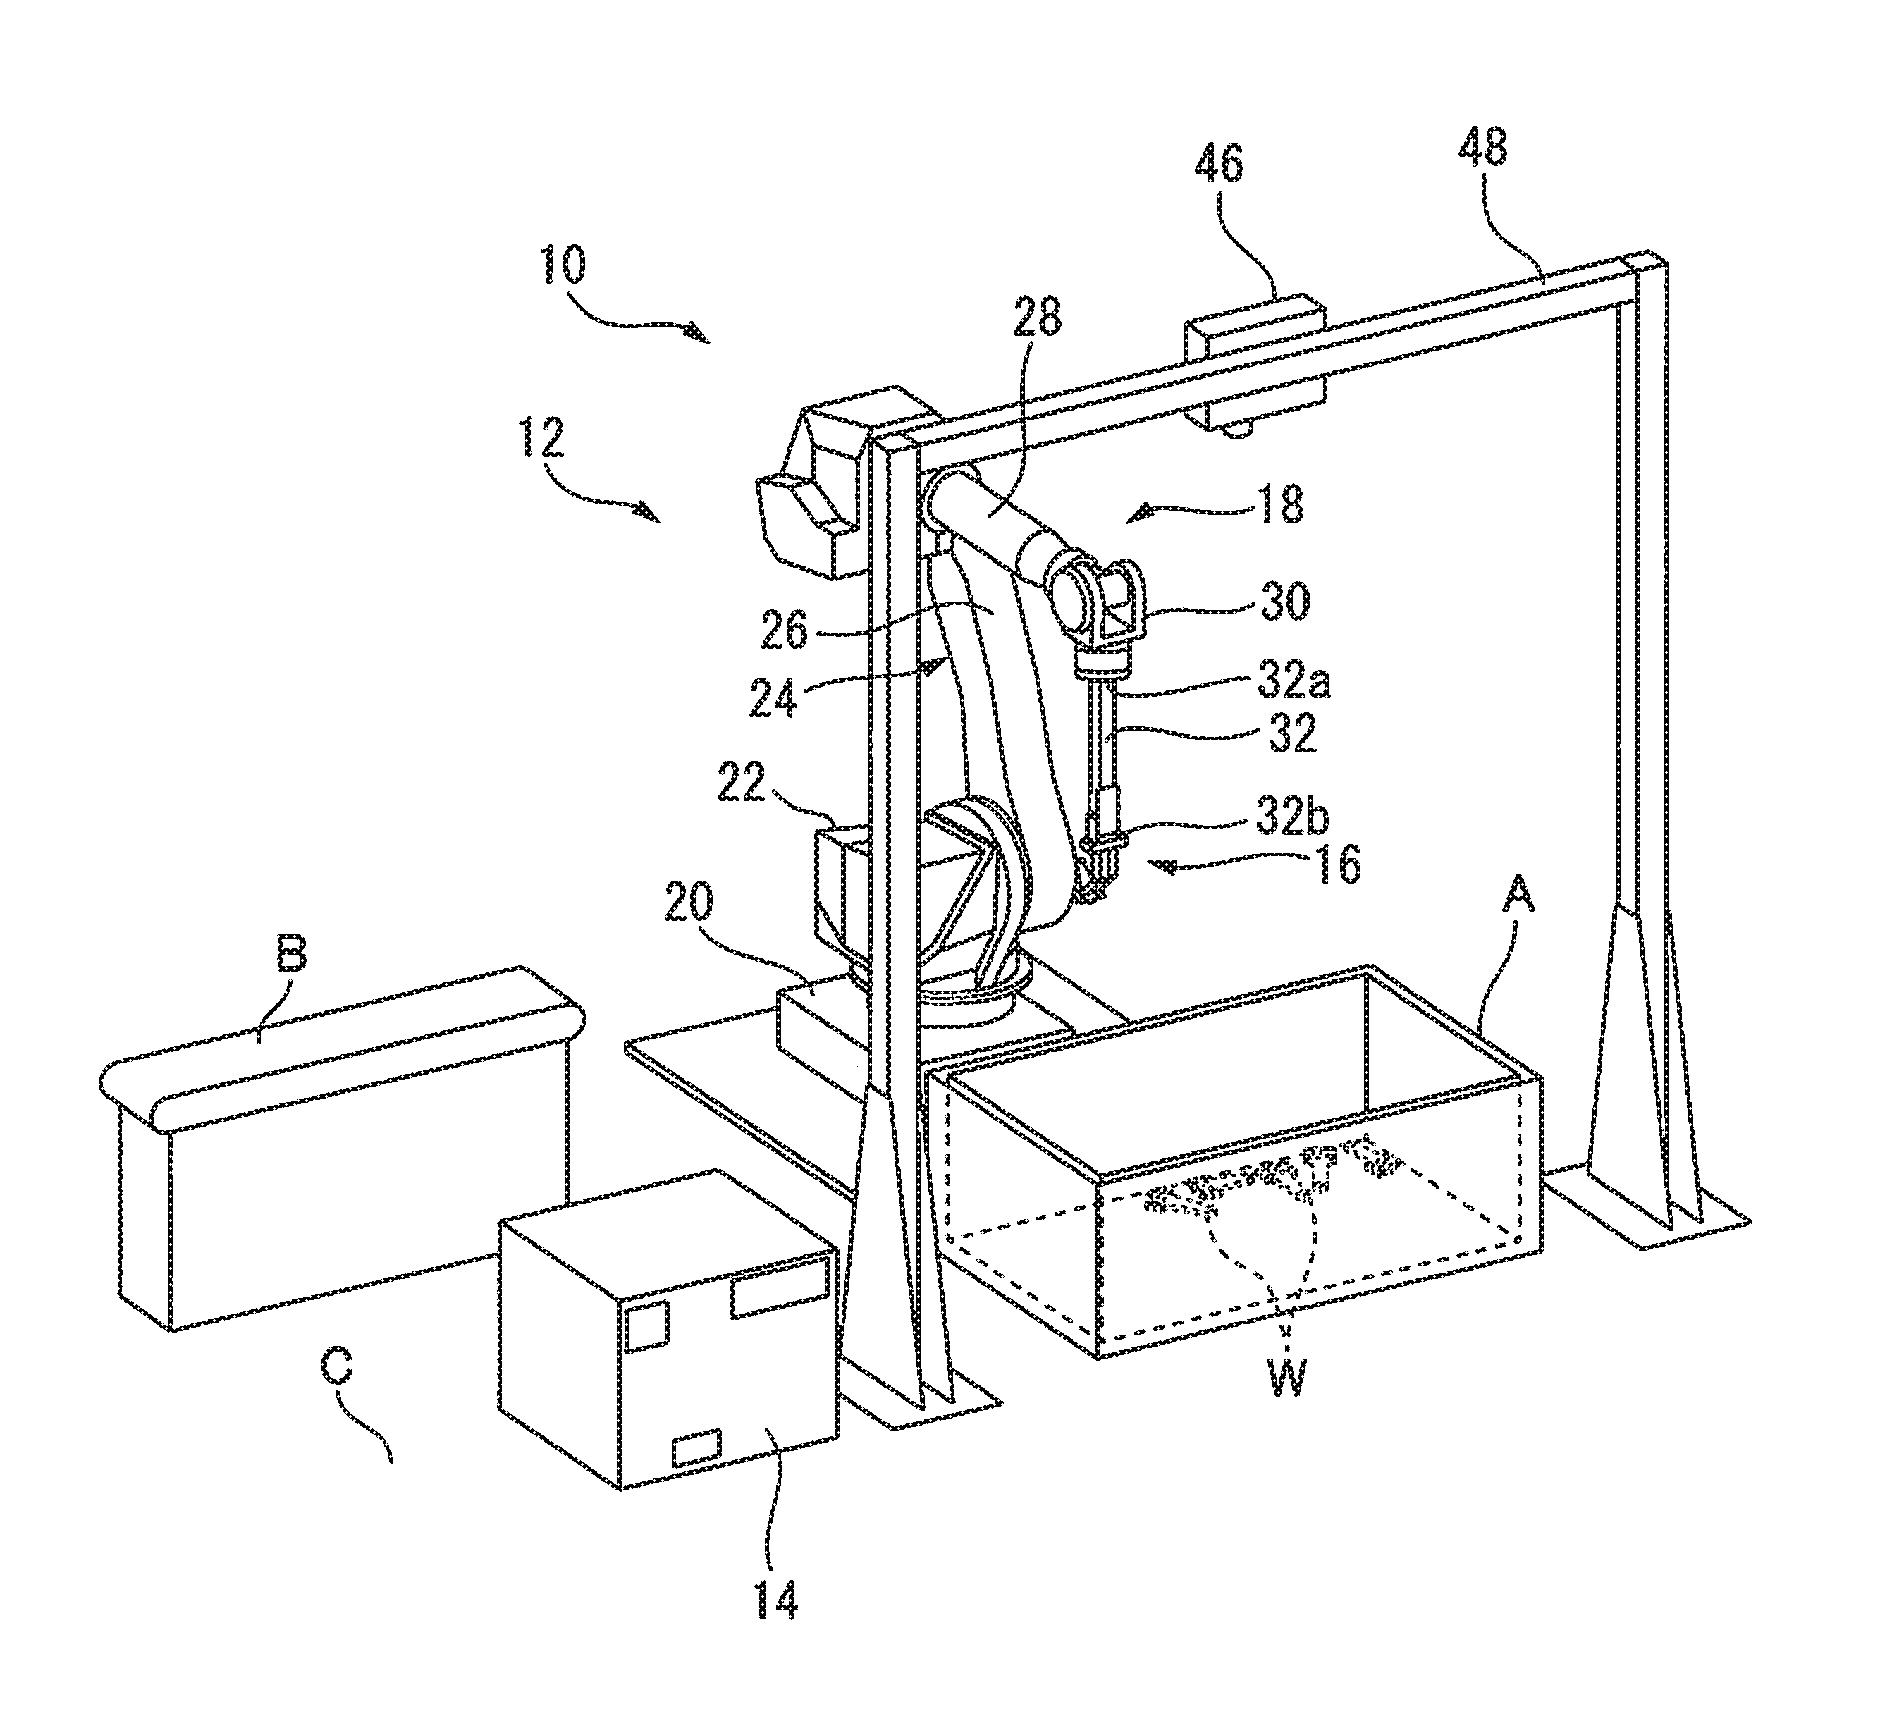 Object pick-up system and method for picking up stacked objects